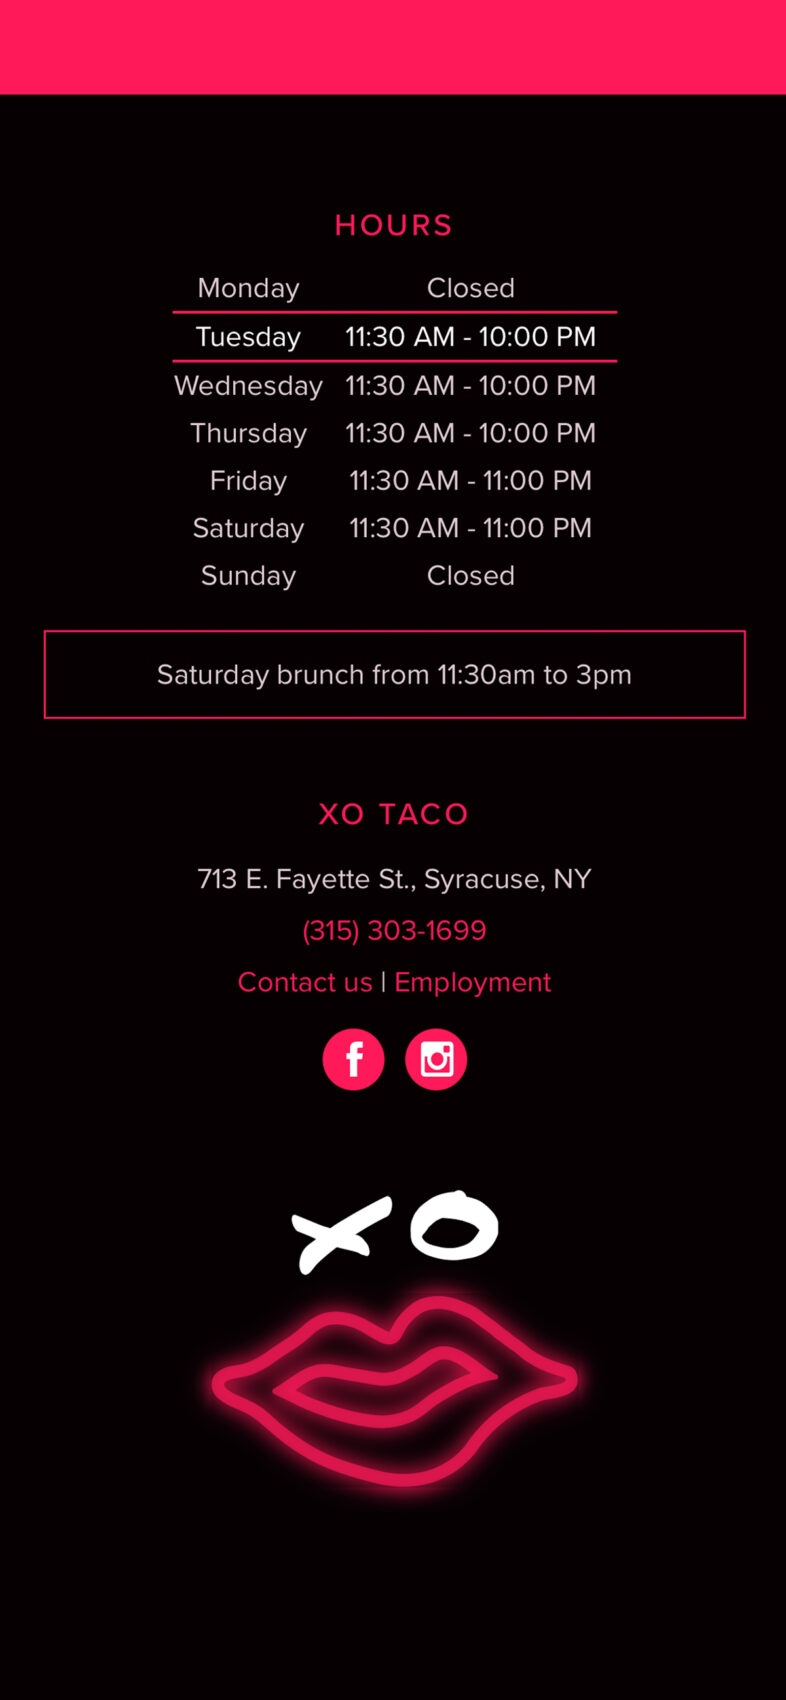 XO Taco's responsive website showing the dynamic restaurant hours footer